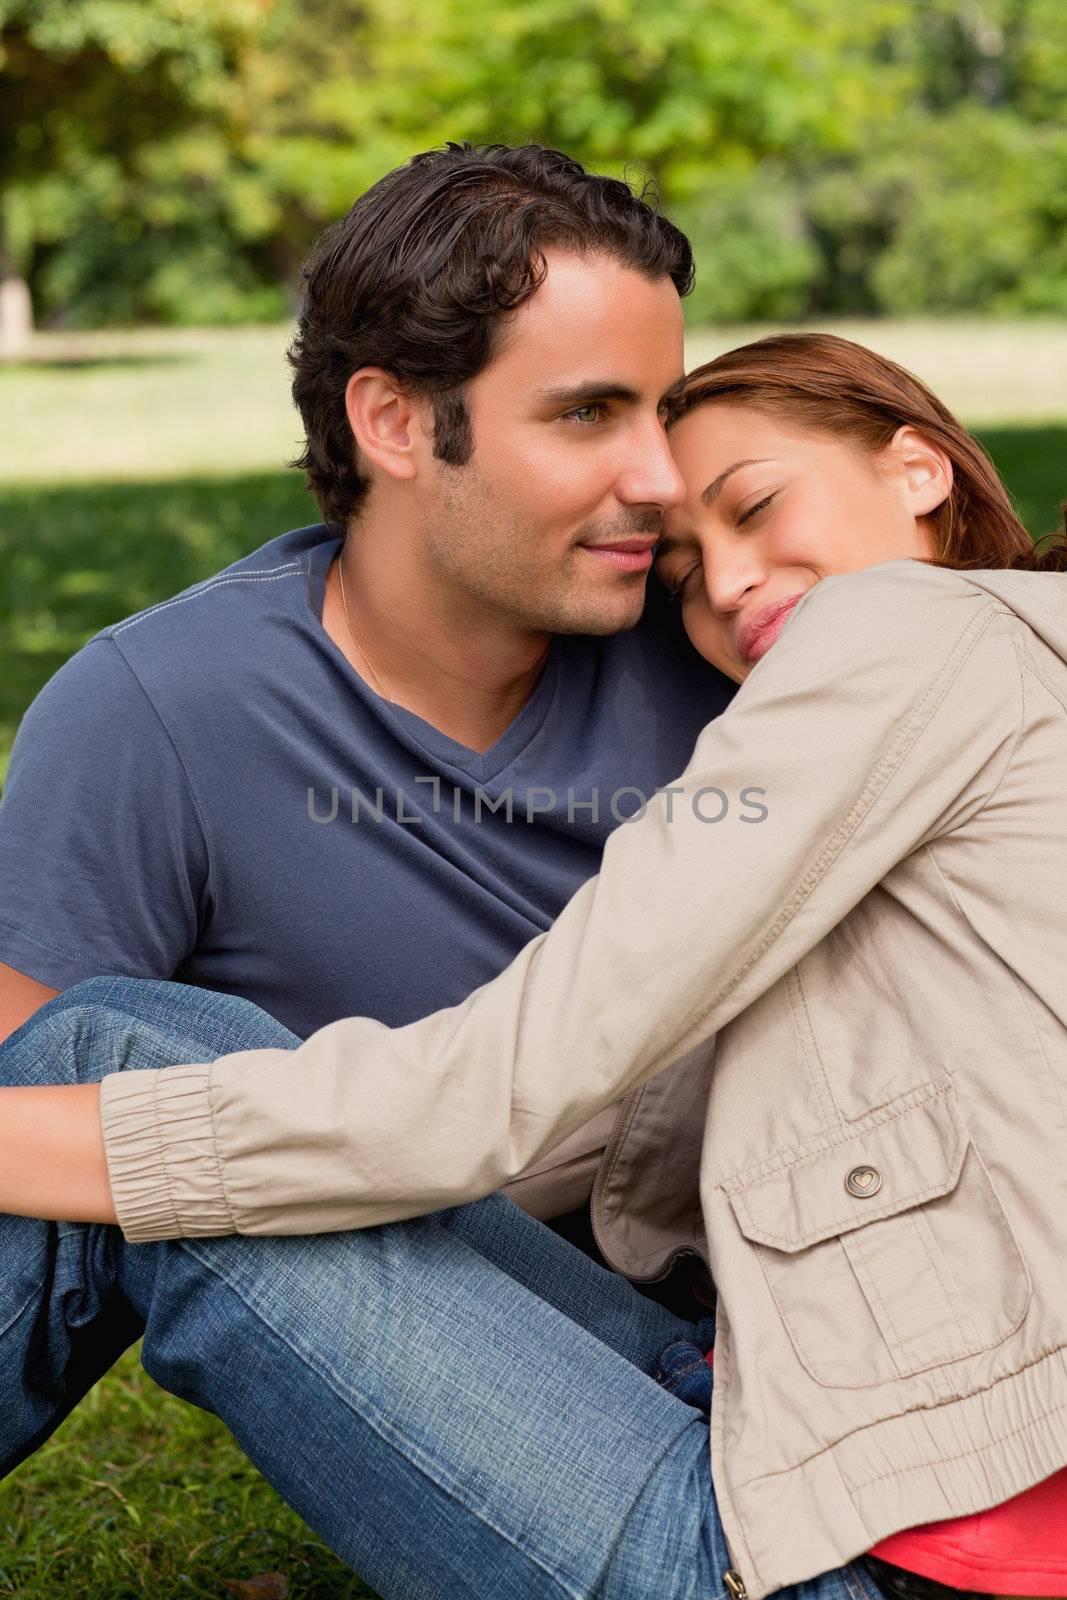 Man looking into the distance as his friend is resting her head on his shoulders with her eyes closed while they both sit on the grass